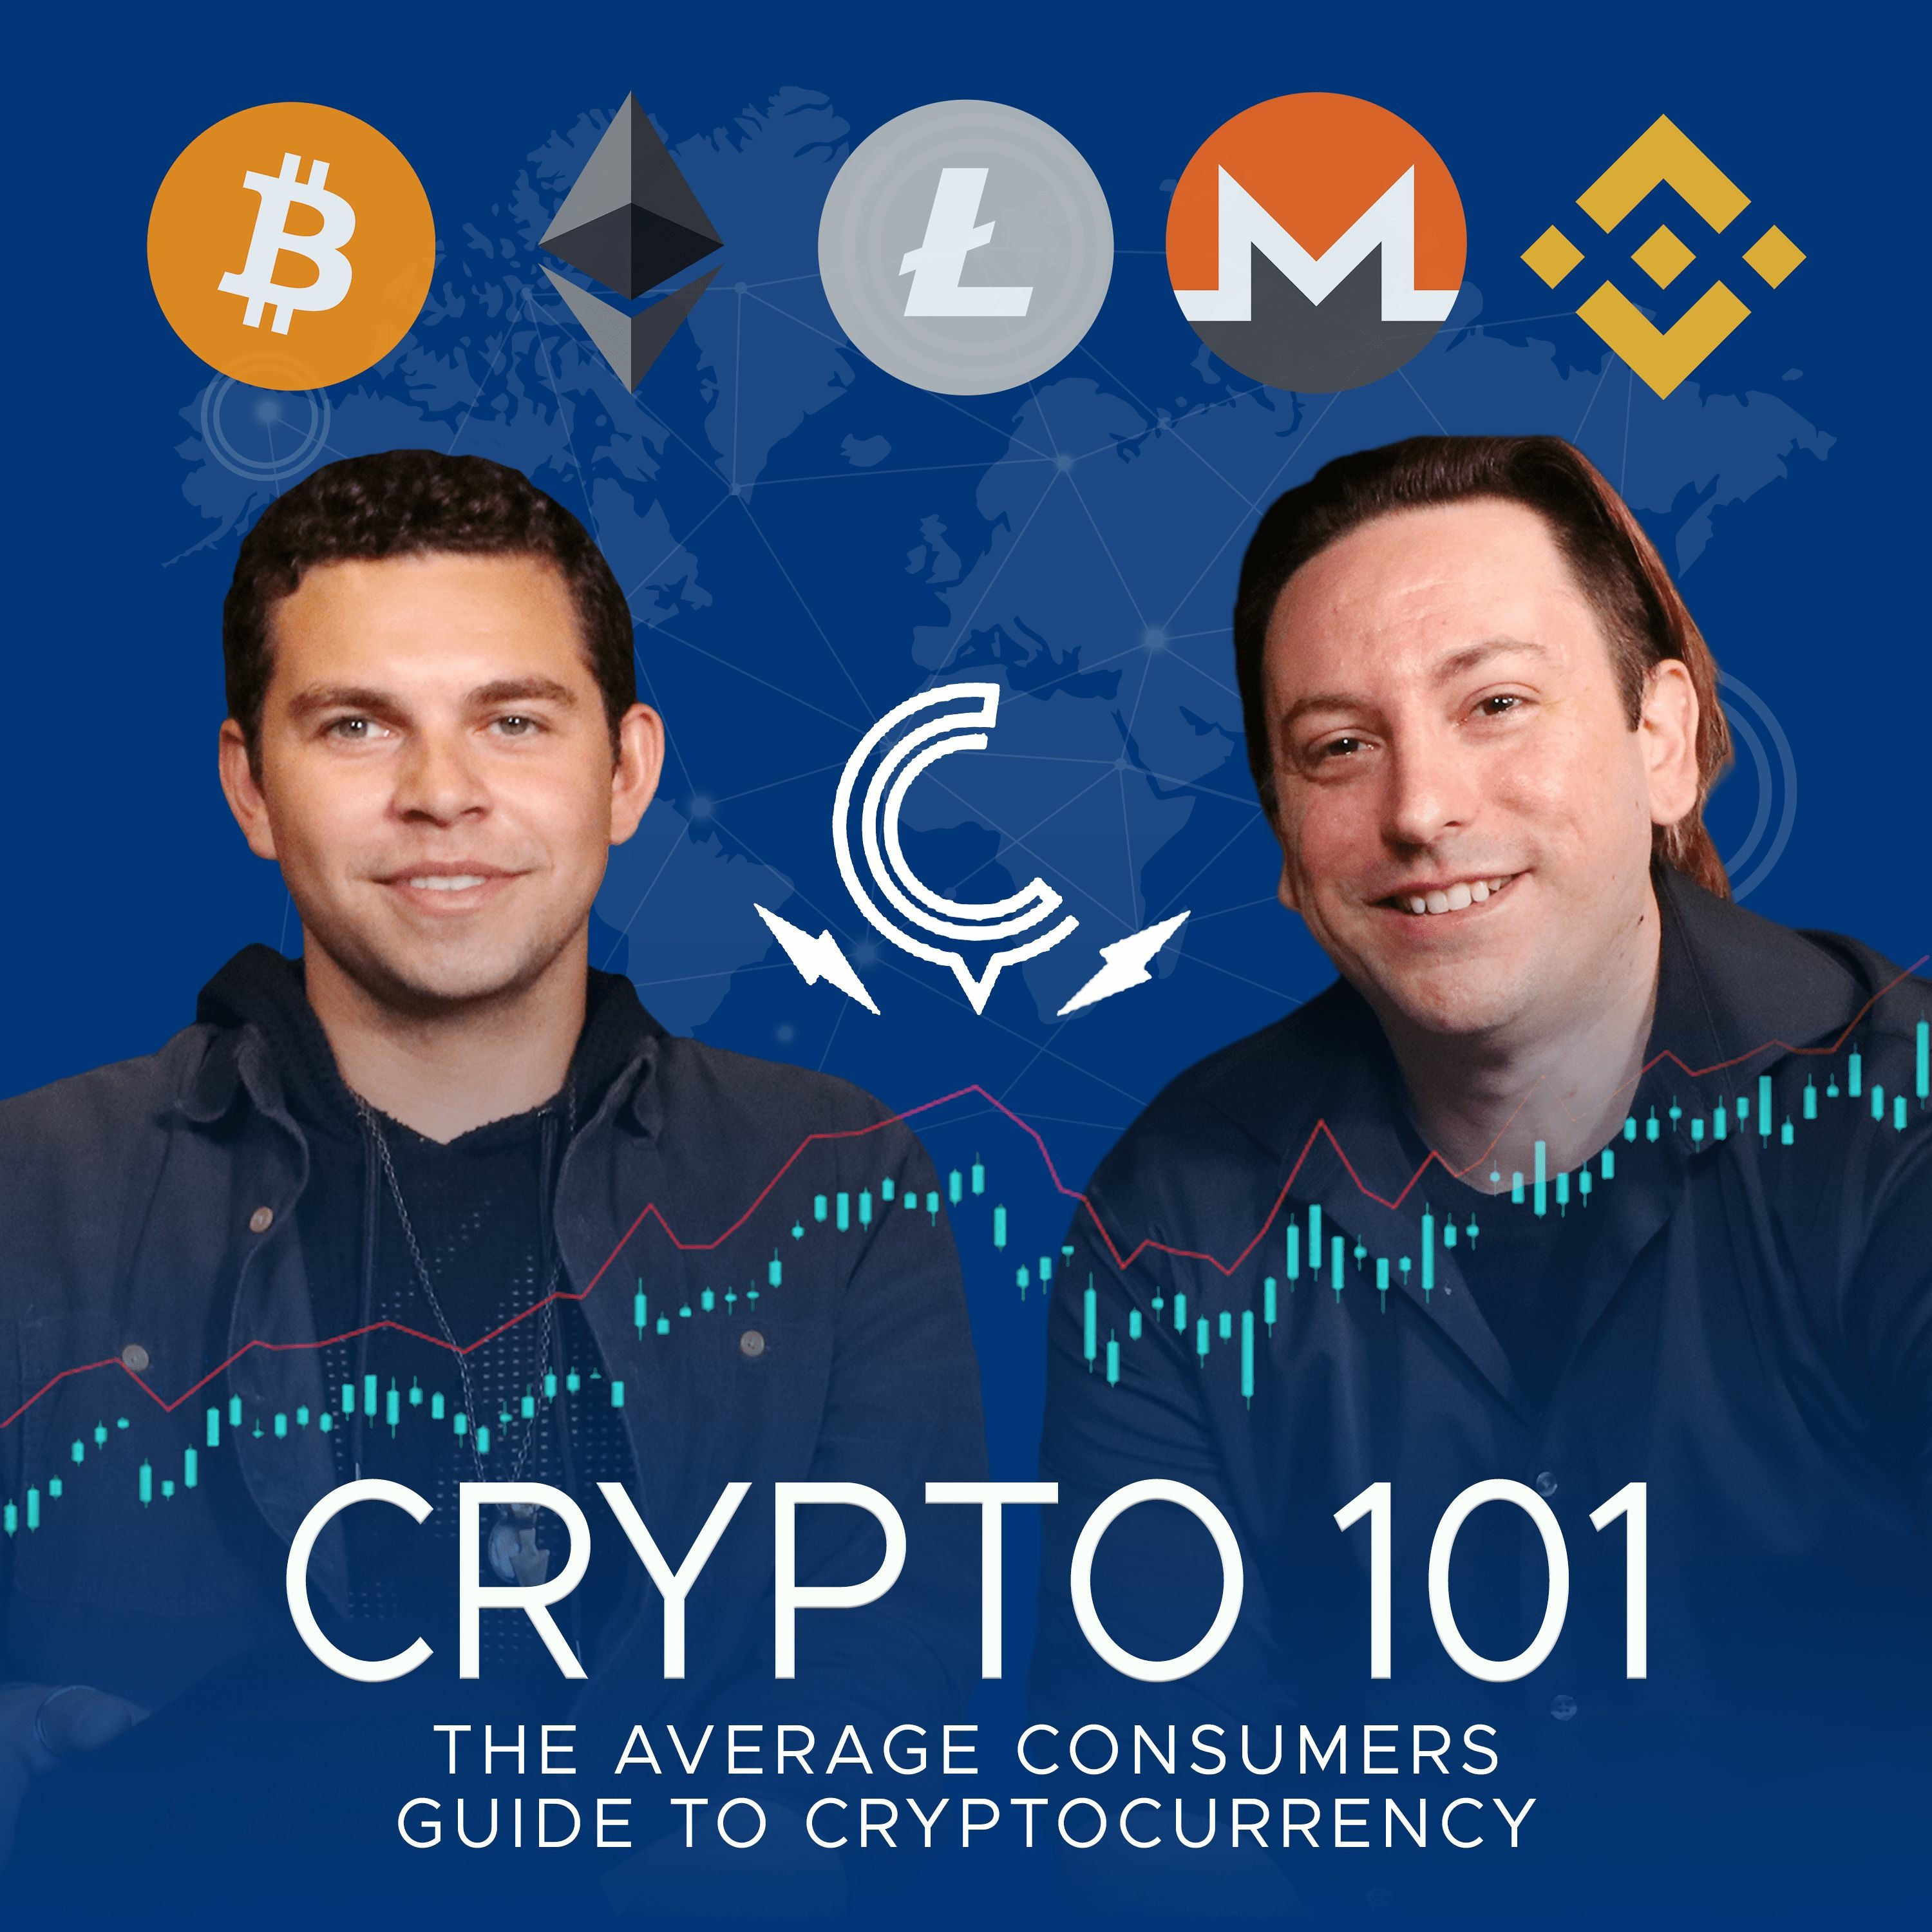 Ep. 306 - Trade the Crypto Markets like a Pro, w/ Evan Feng of Tapestry Capital